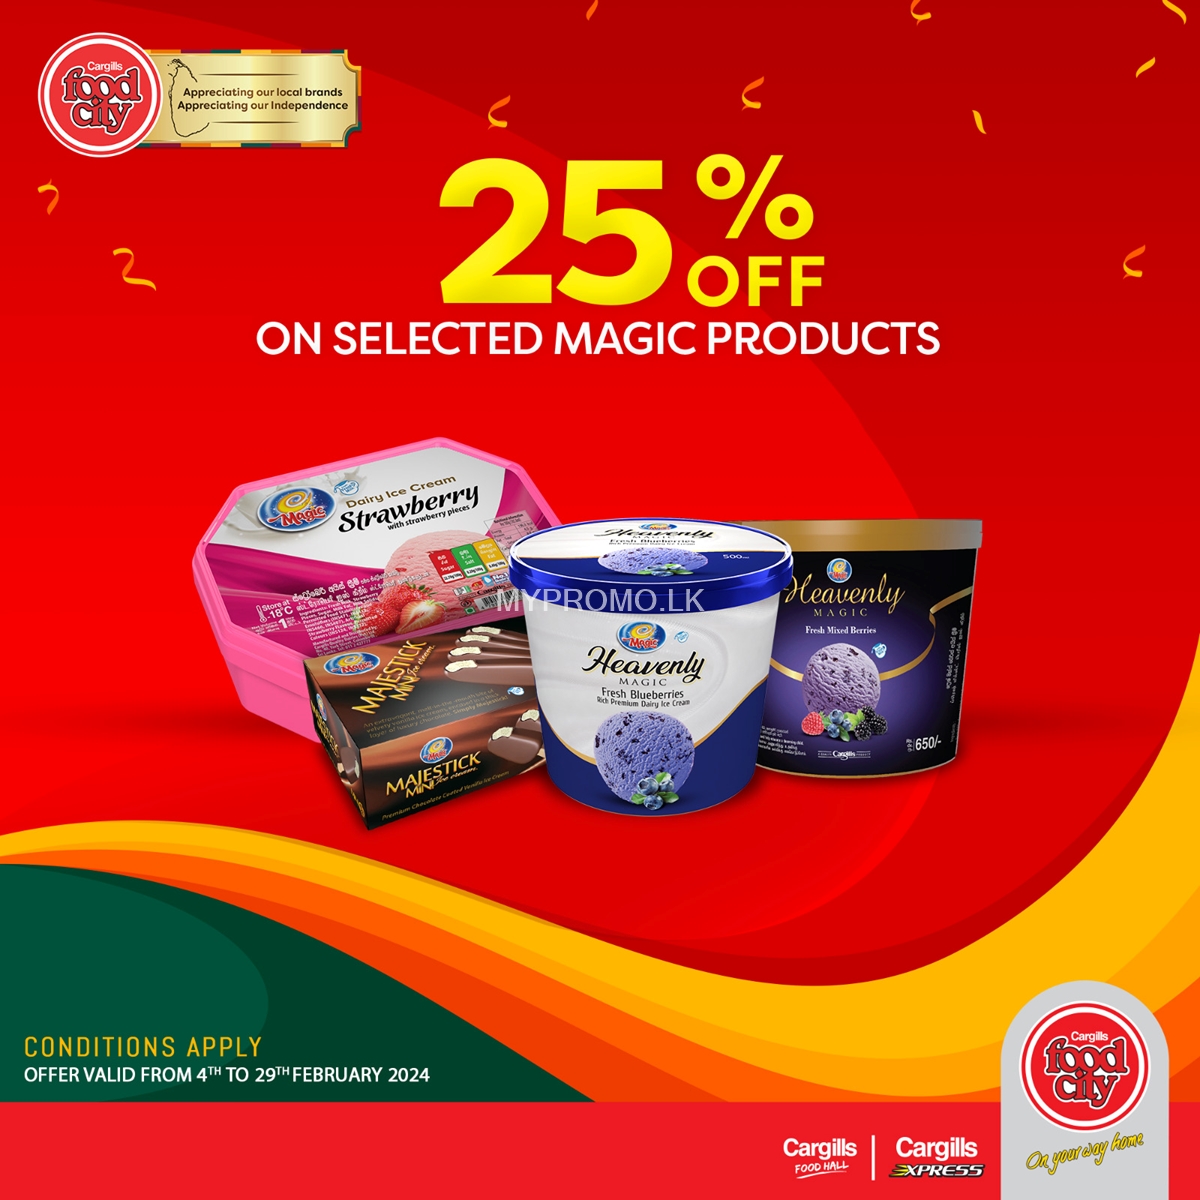 Savings of up to 30% on 100 products from a range of selected brands at Cargills Food City